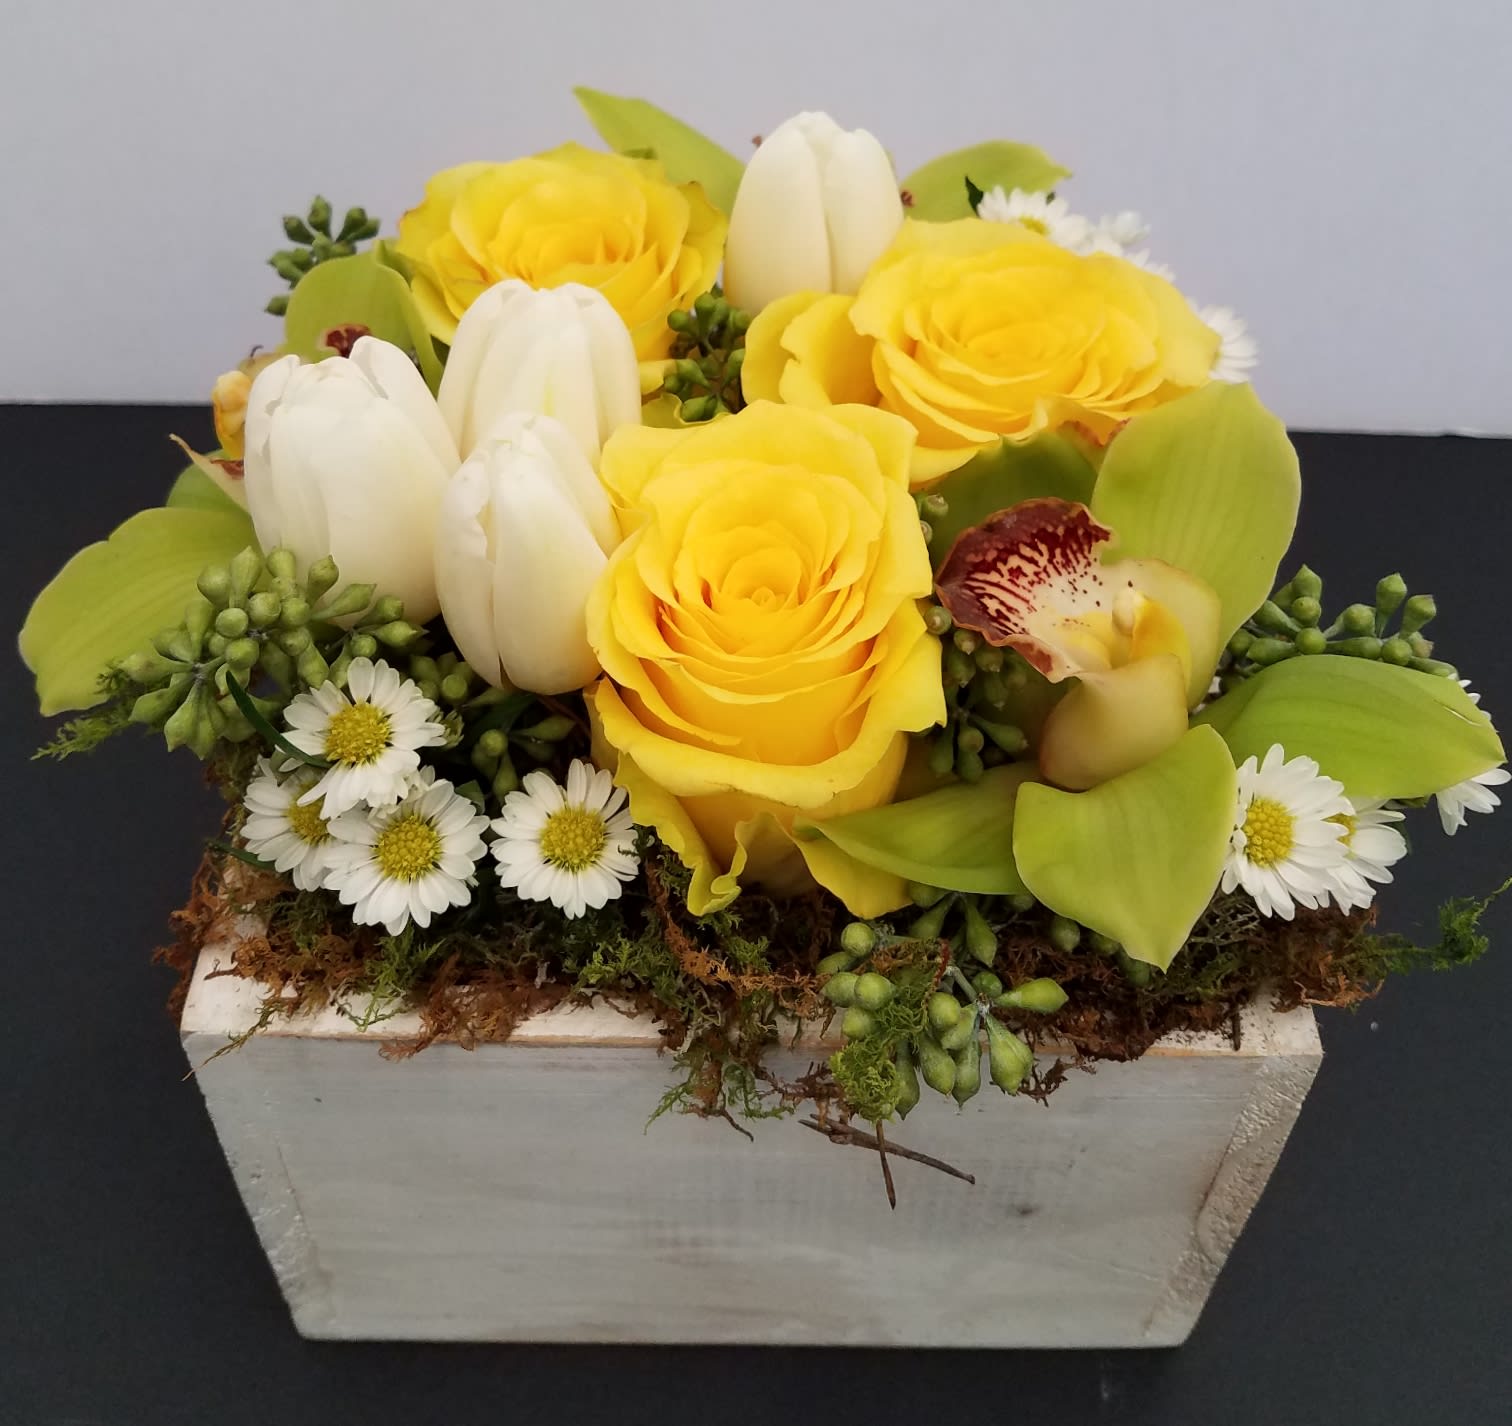 Spring Showers - A modern white wooden box filled with yellow roses, white tulips, green orchids and finished with dainty sprigs of asters.